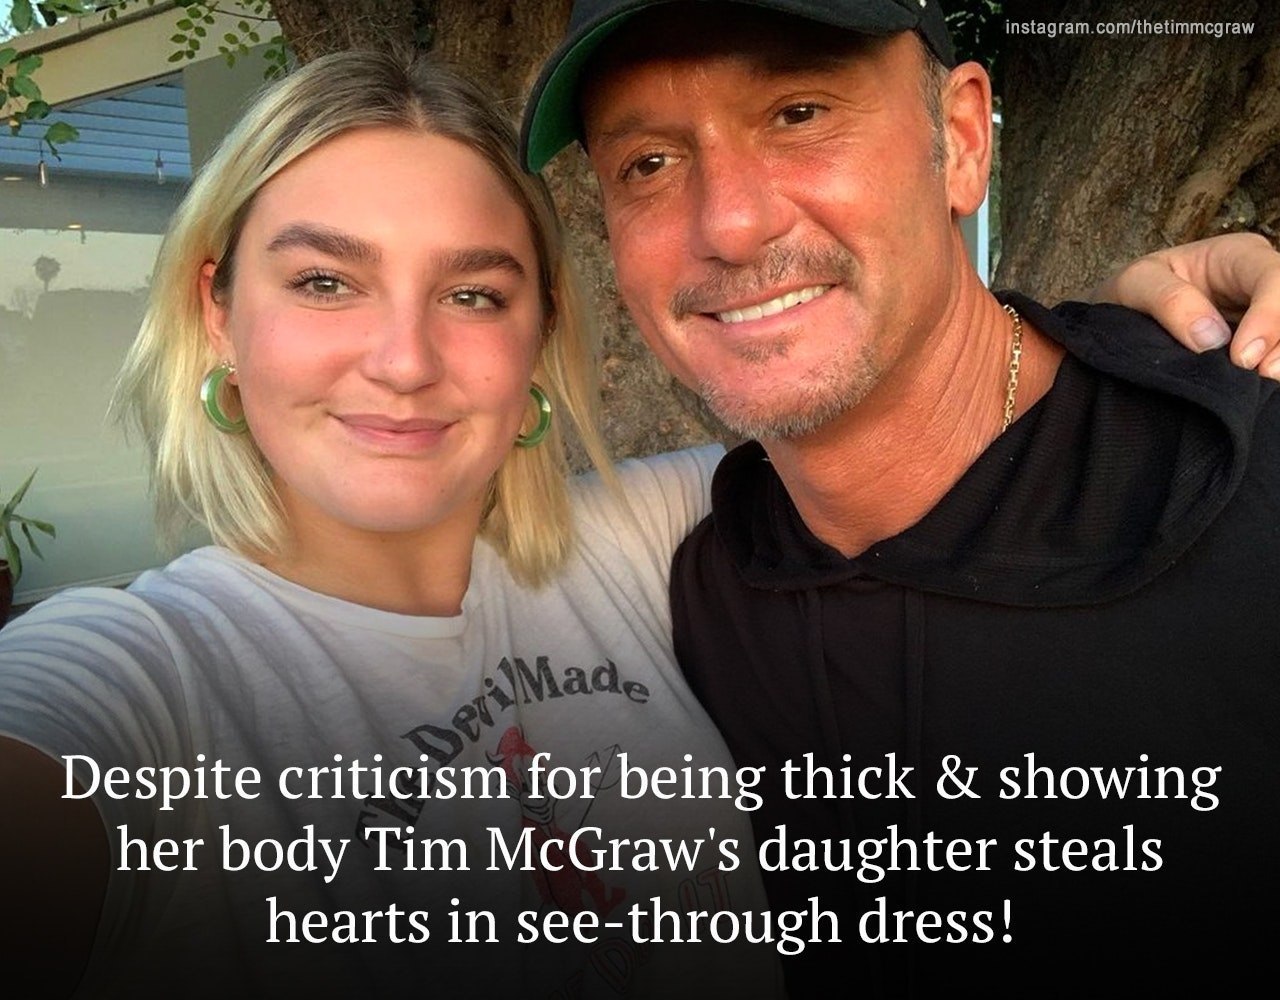 Tim McGraw’s Daughter Flaunts Curves in Pink See-through Dress after Criticism for Being Thick & Showing Her Body